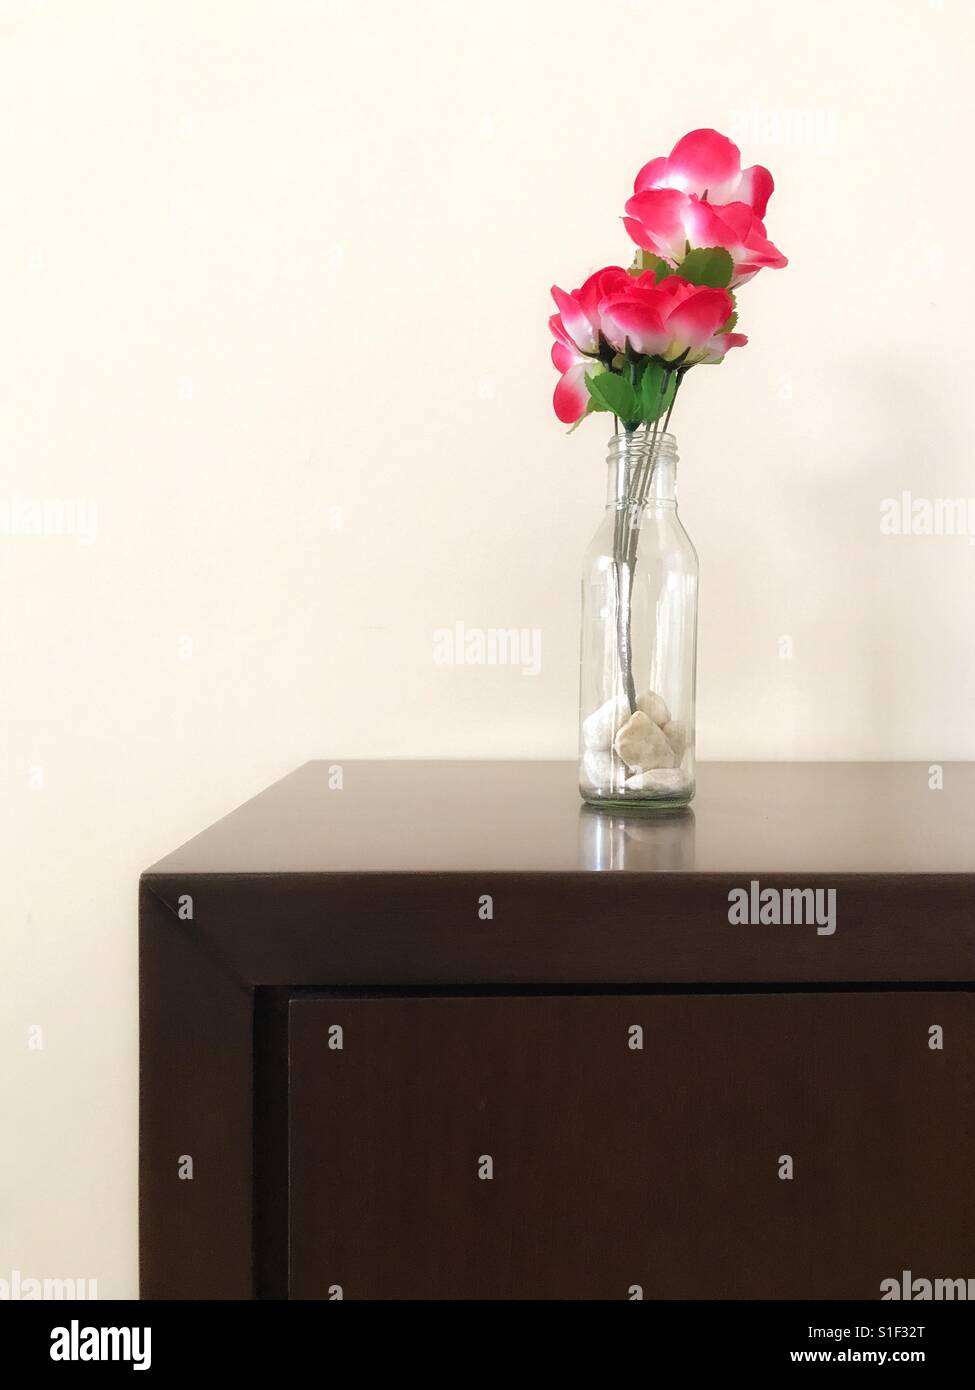 Flower on a wood rack against a off-white wall Stock Photo